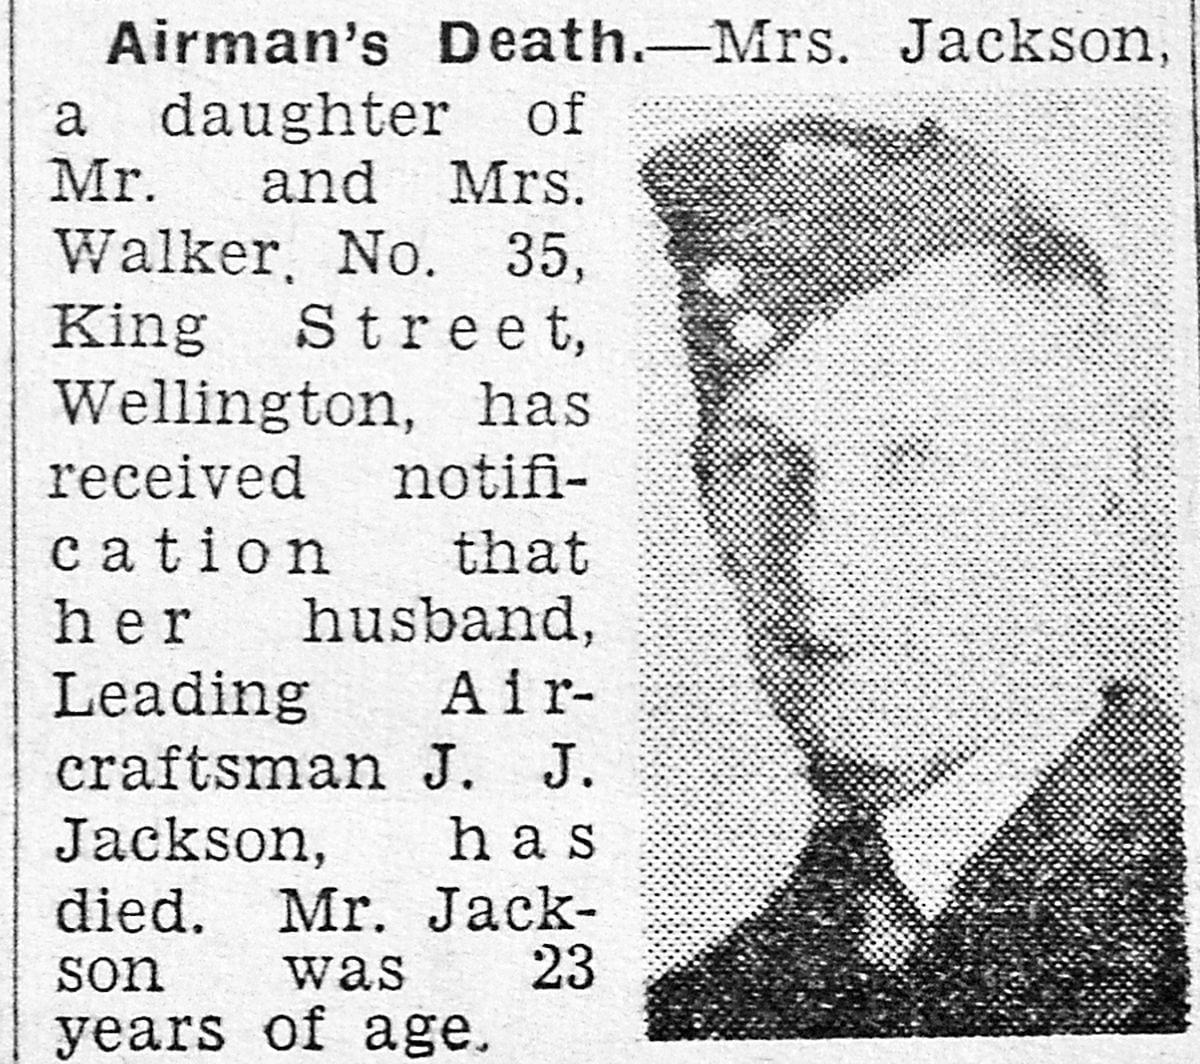 How John Jackson's death was reported.